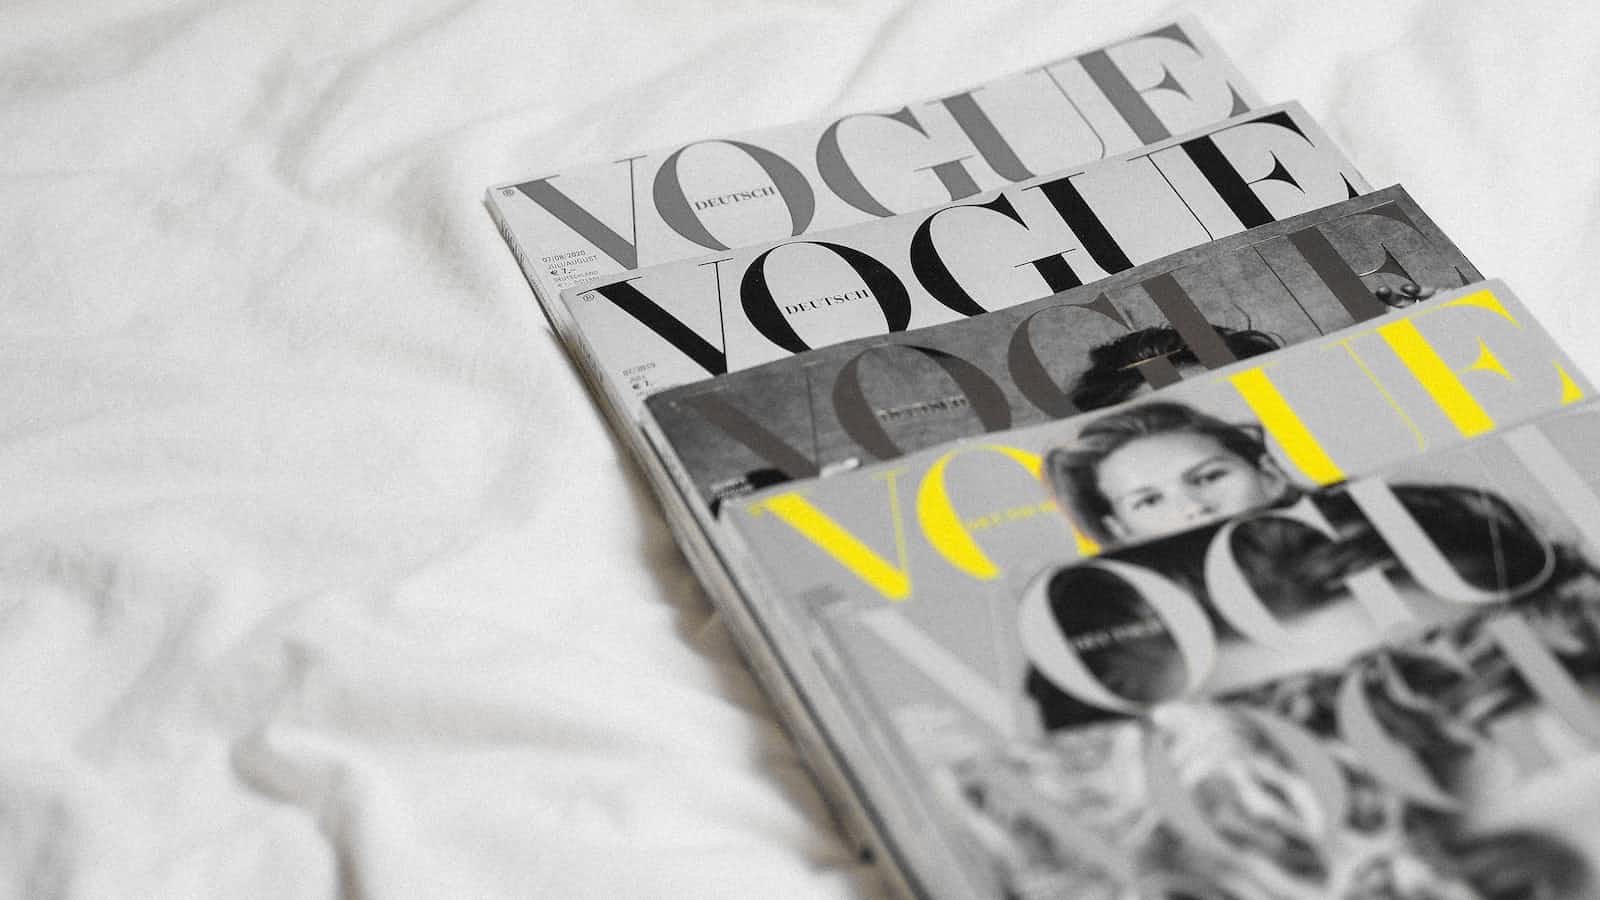 Four issues of Vogue magazines staggered on top of each other